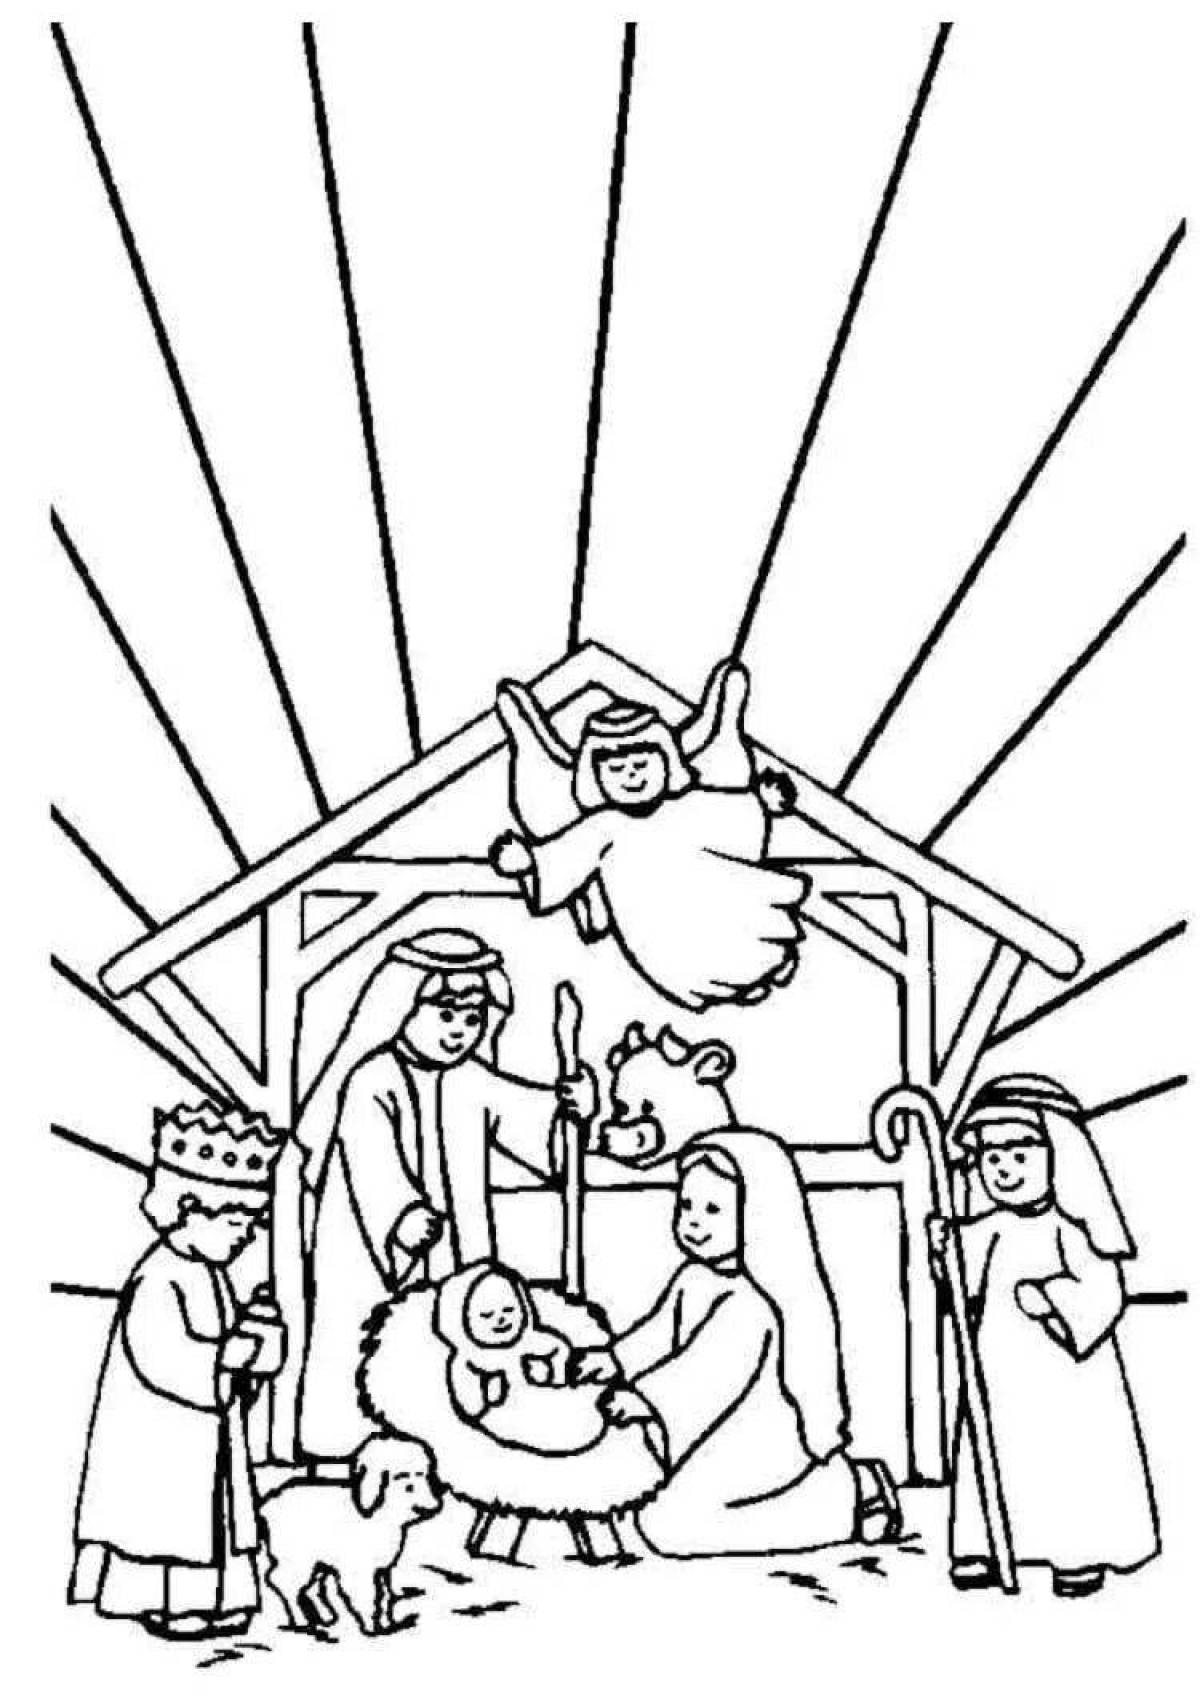 Coloring page glorious jesus in the manger